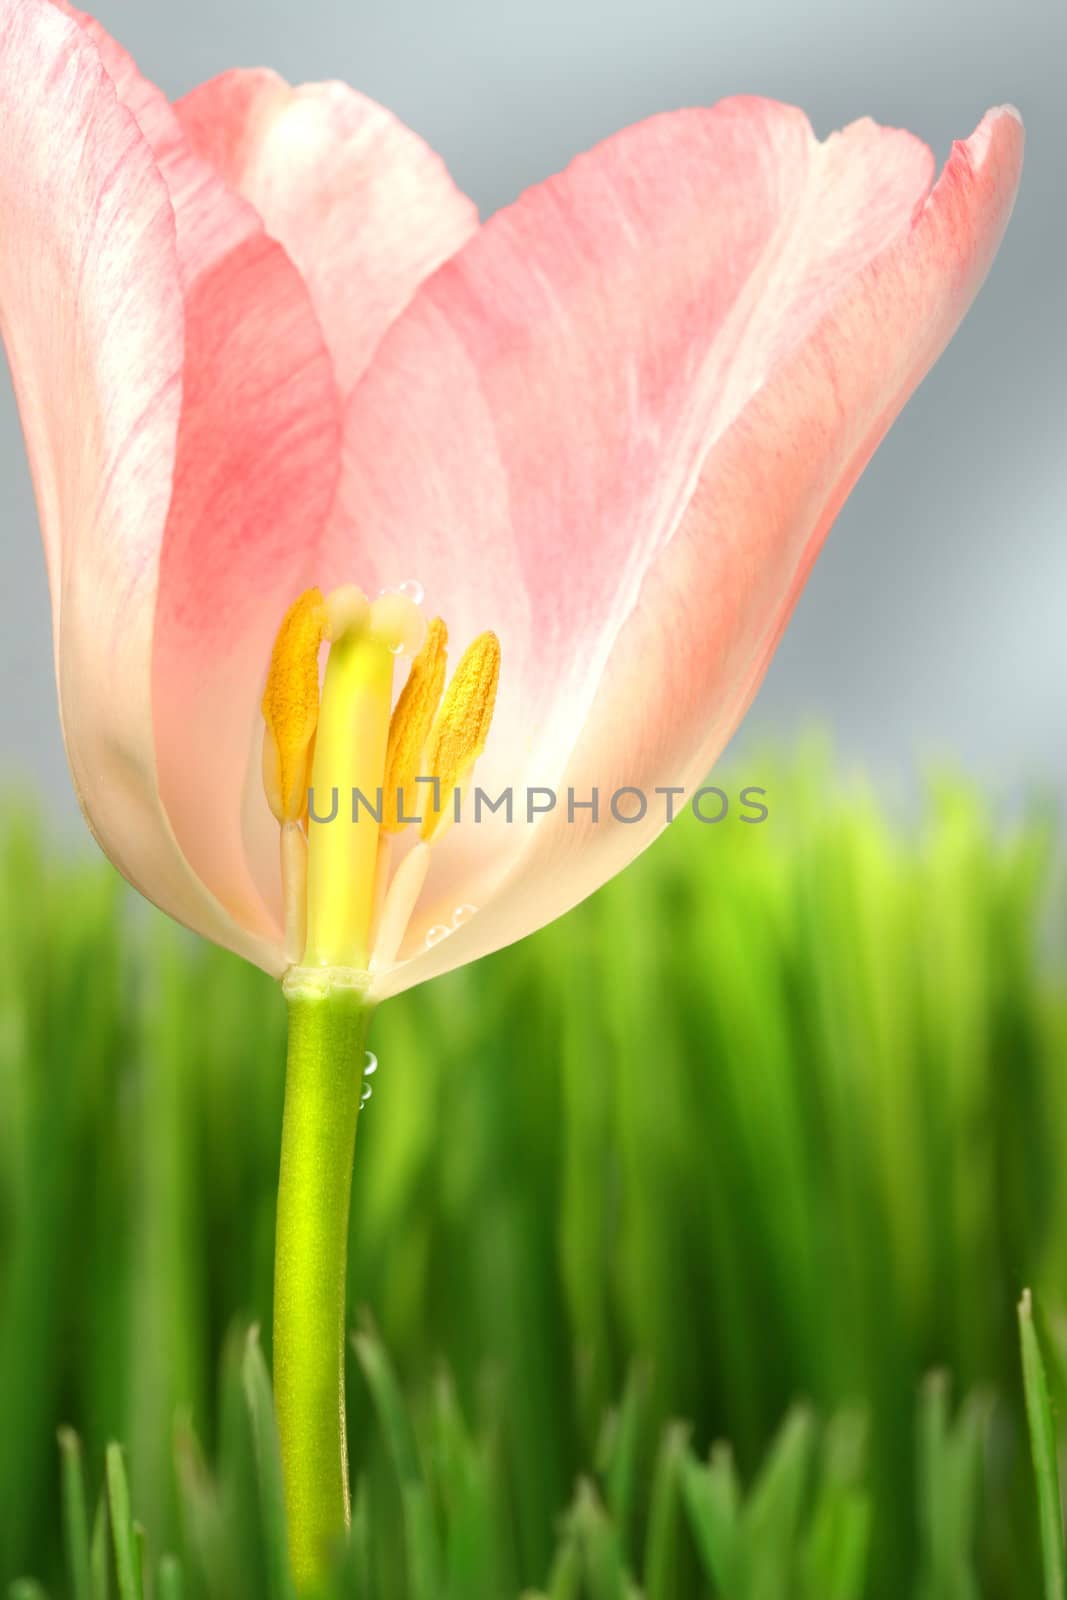 Inside of a pink tulip by Sandralise